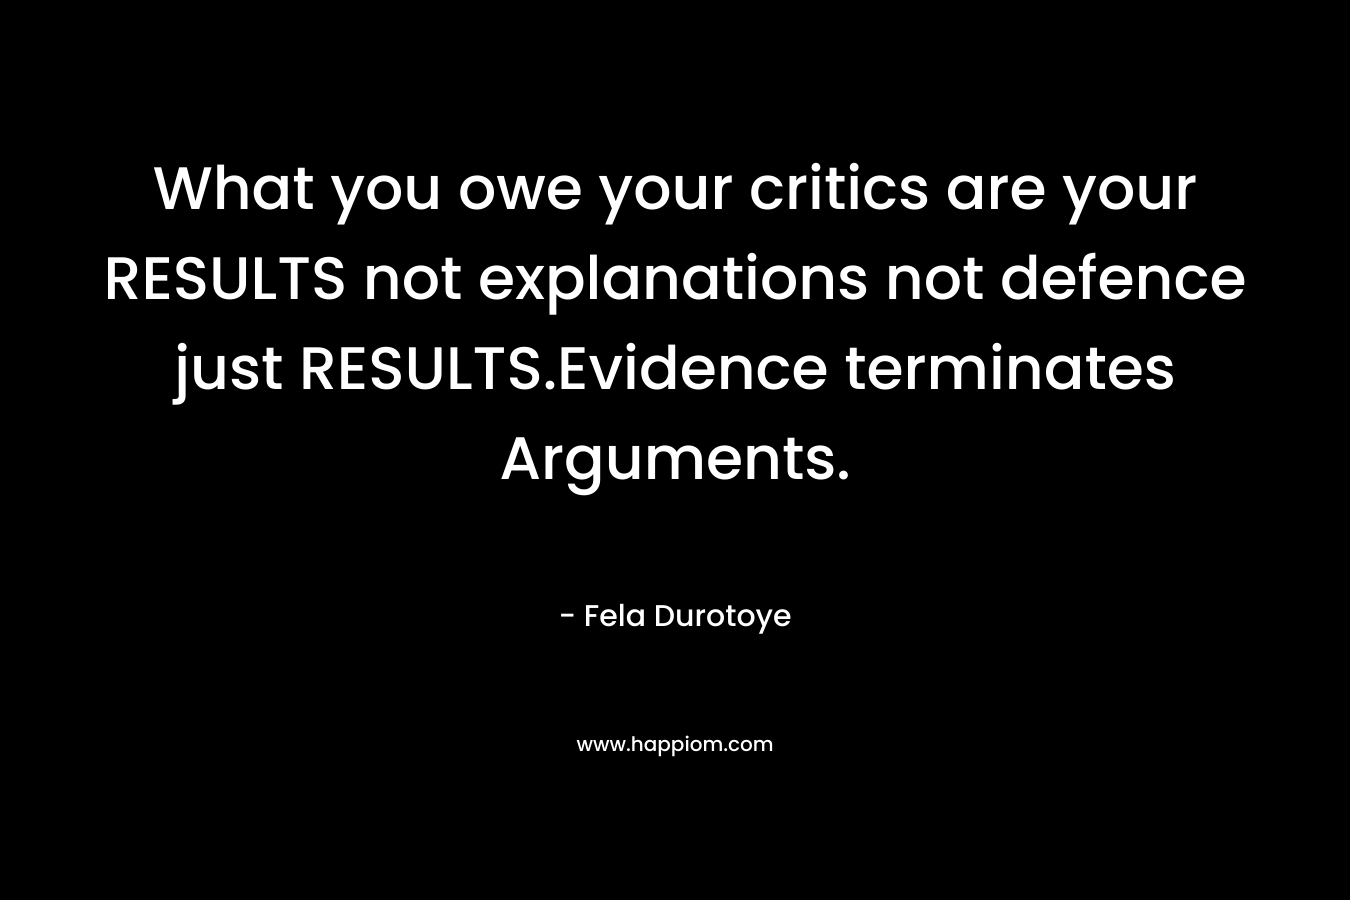 What you owe your critics are your RESULTS not explanations not defence just RESULTS.Evidence terminates Arguments. – Fela Durotoye